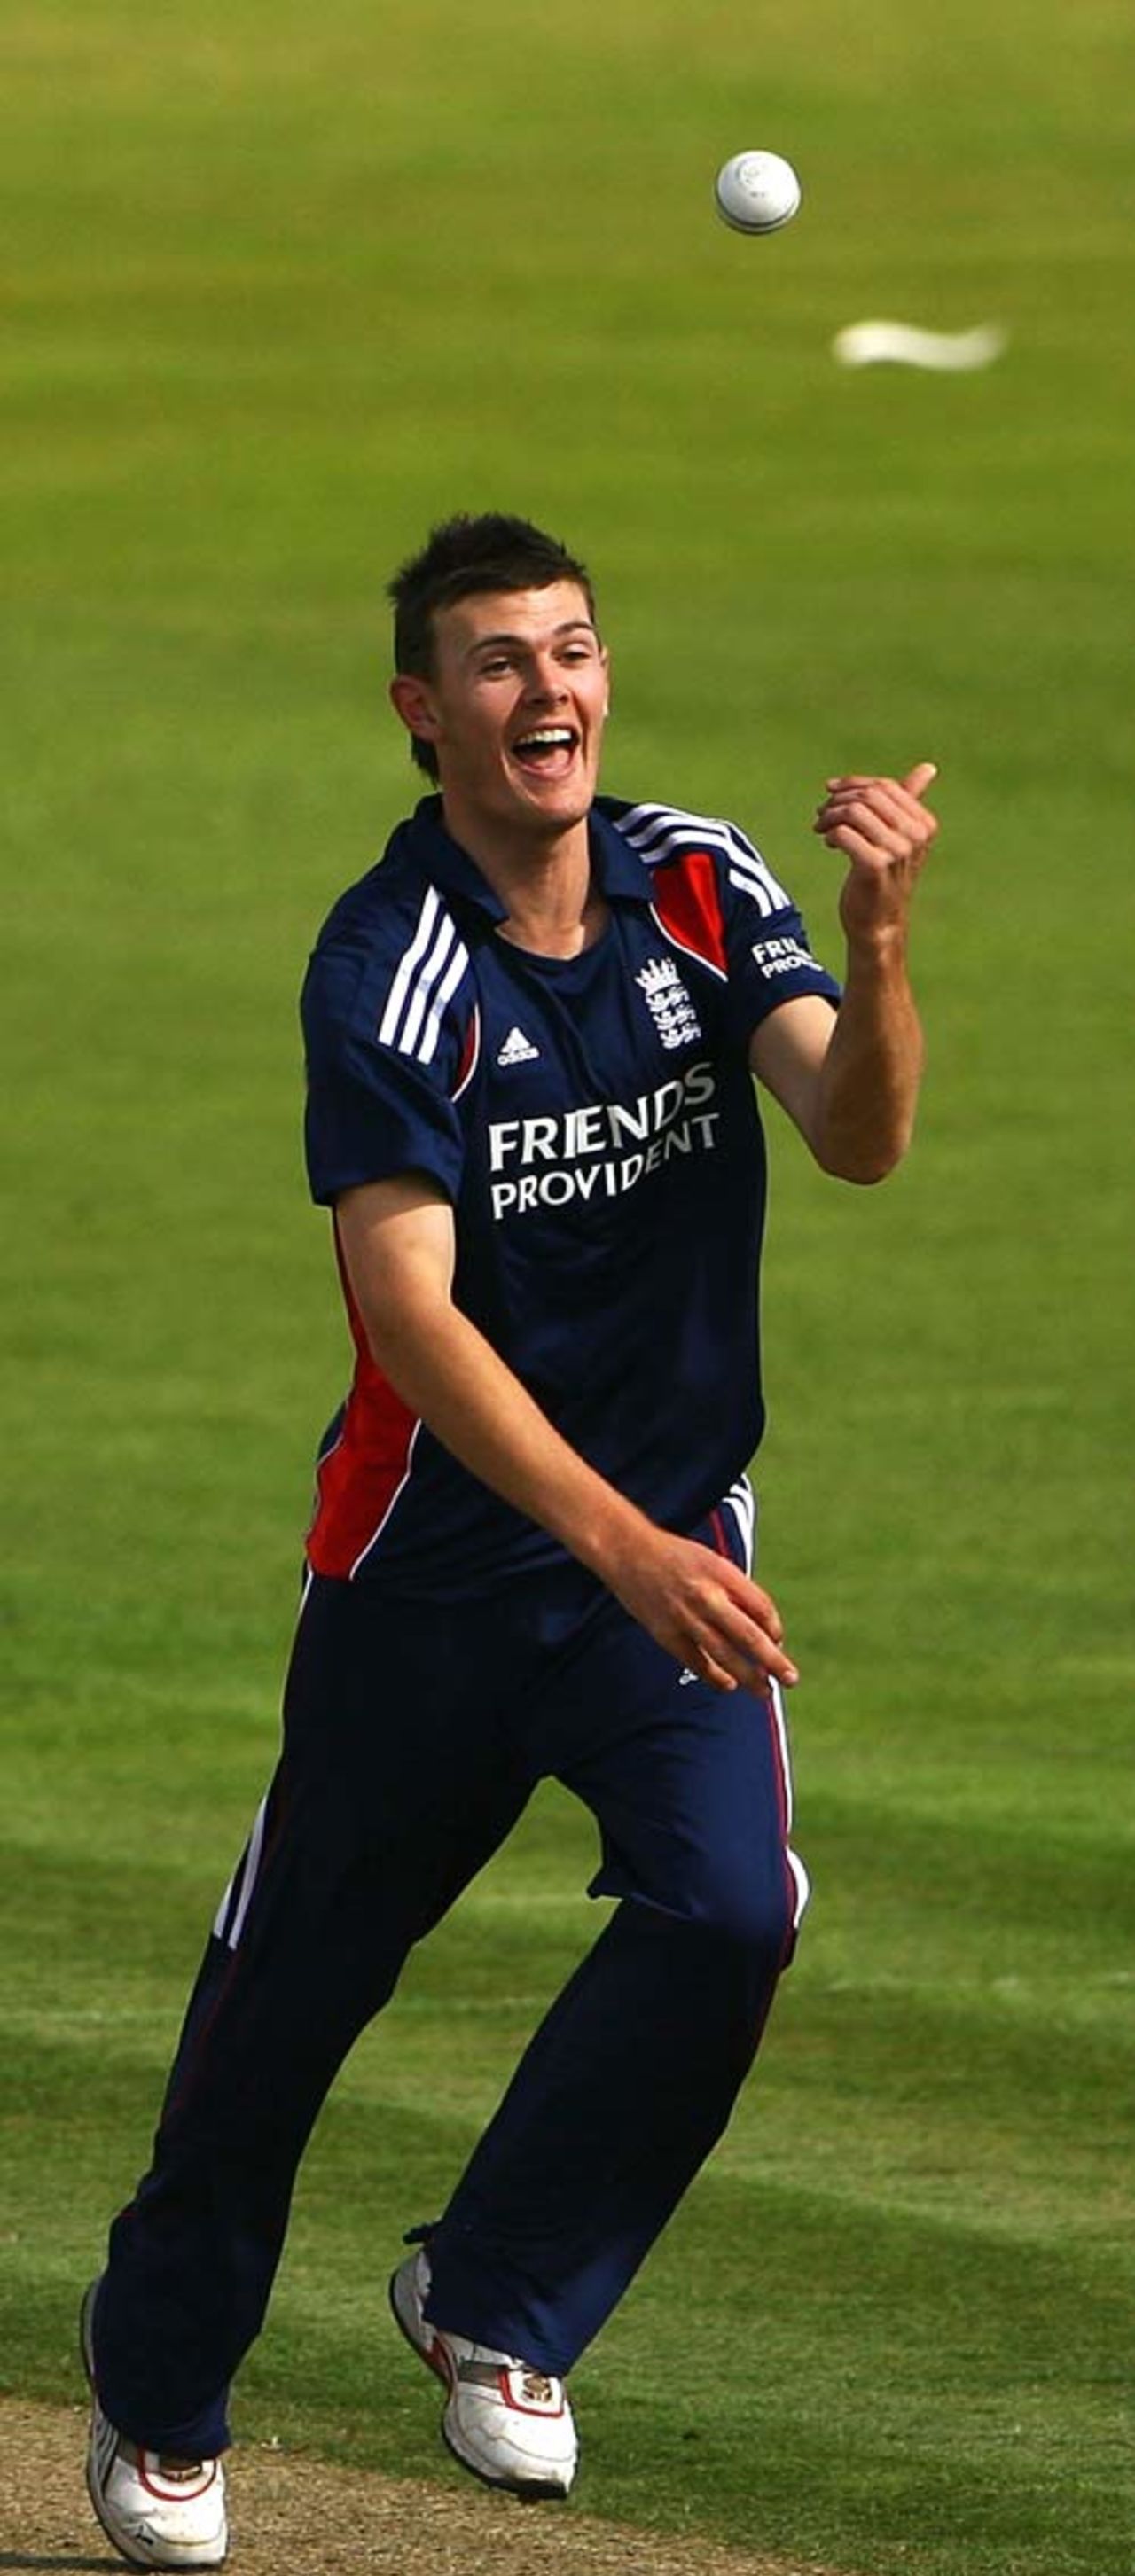 James Harris takes a neat caught-and-bowled, England Under-19s v New Zealand Under-19s, 4th ODI, Northampton, August 14, 2008